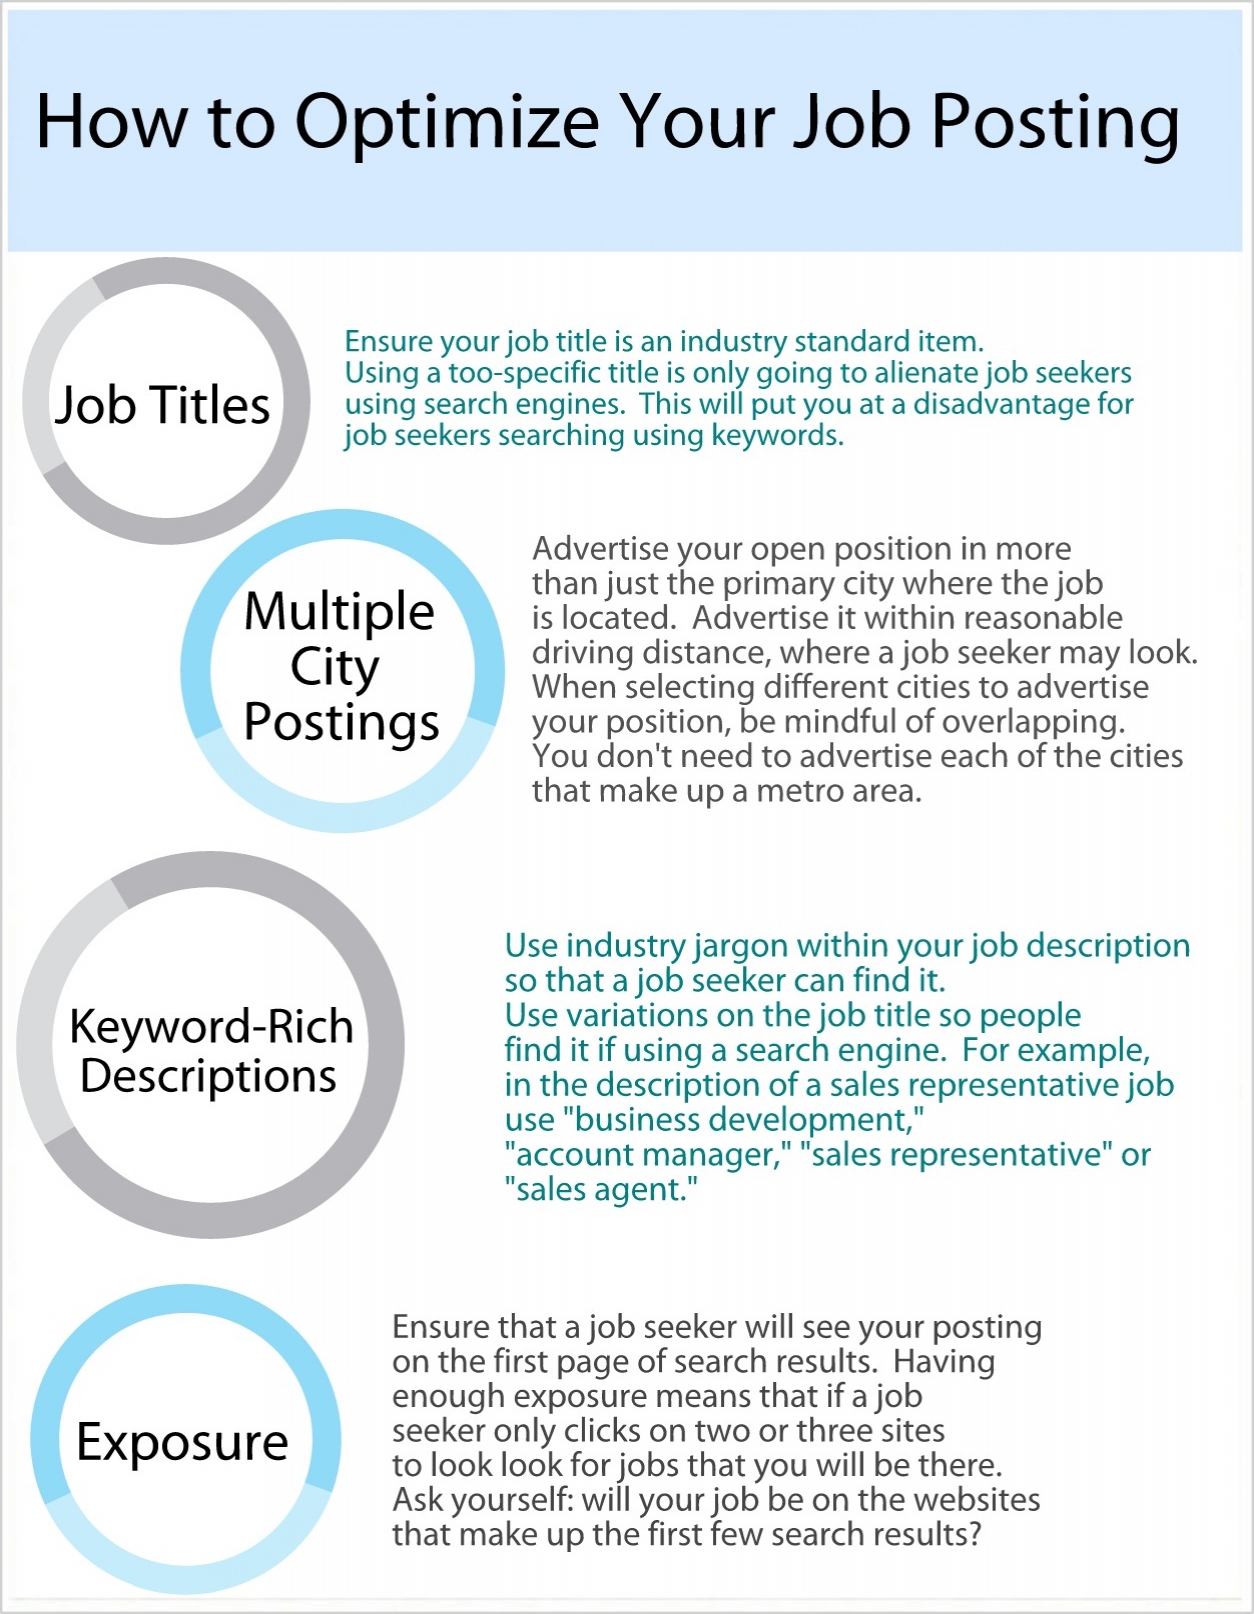 Tips to optimize your job posting.